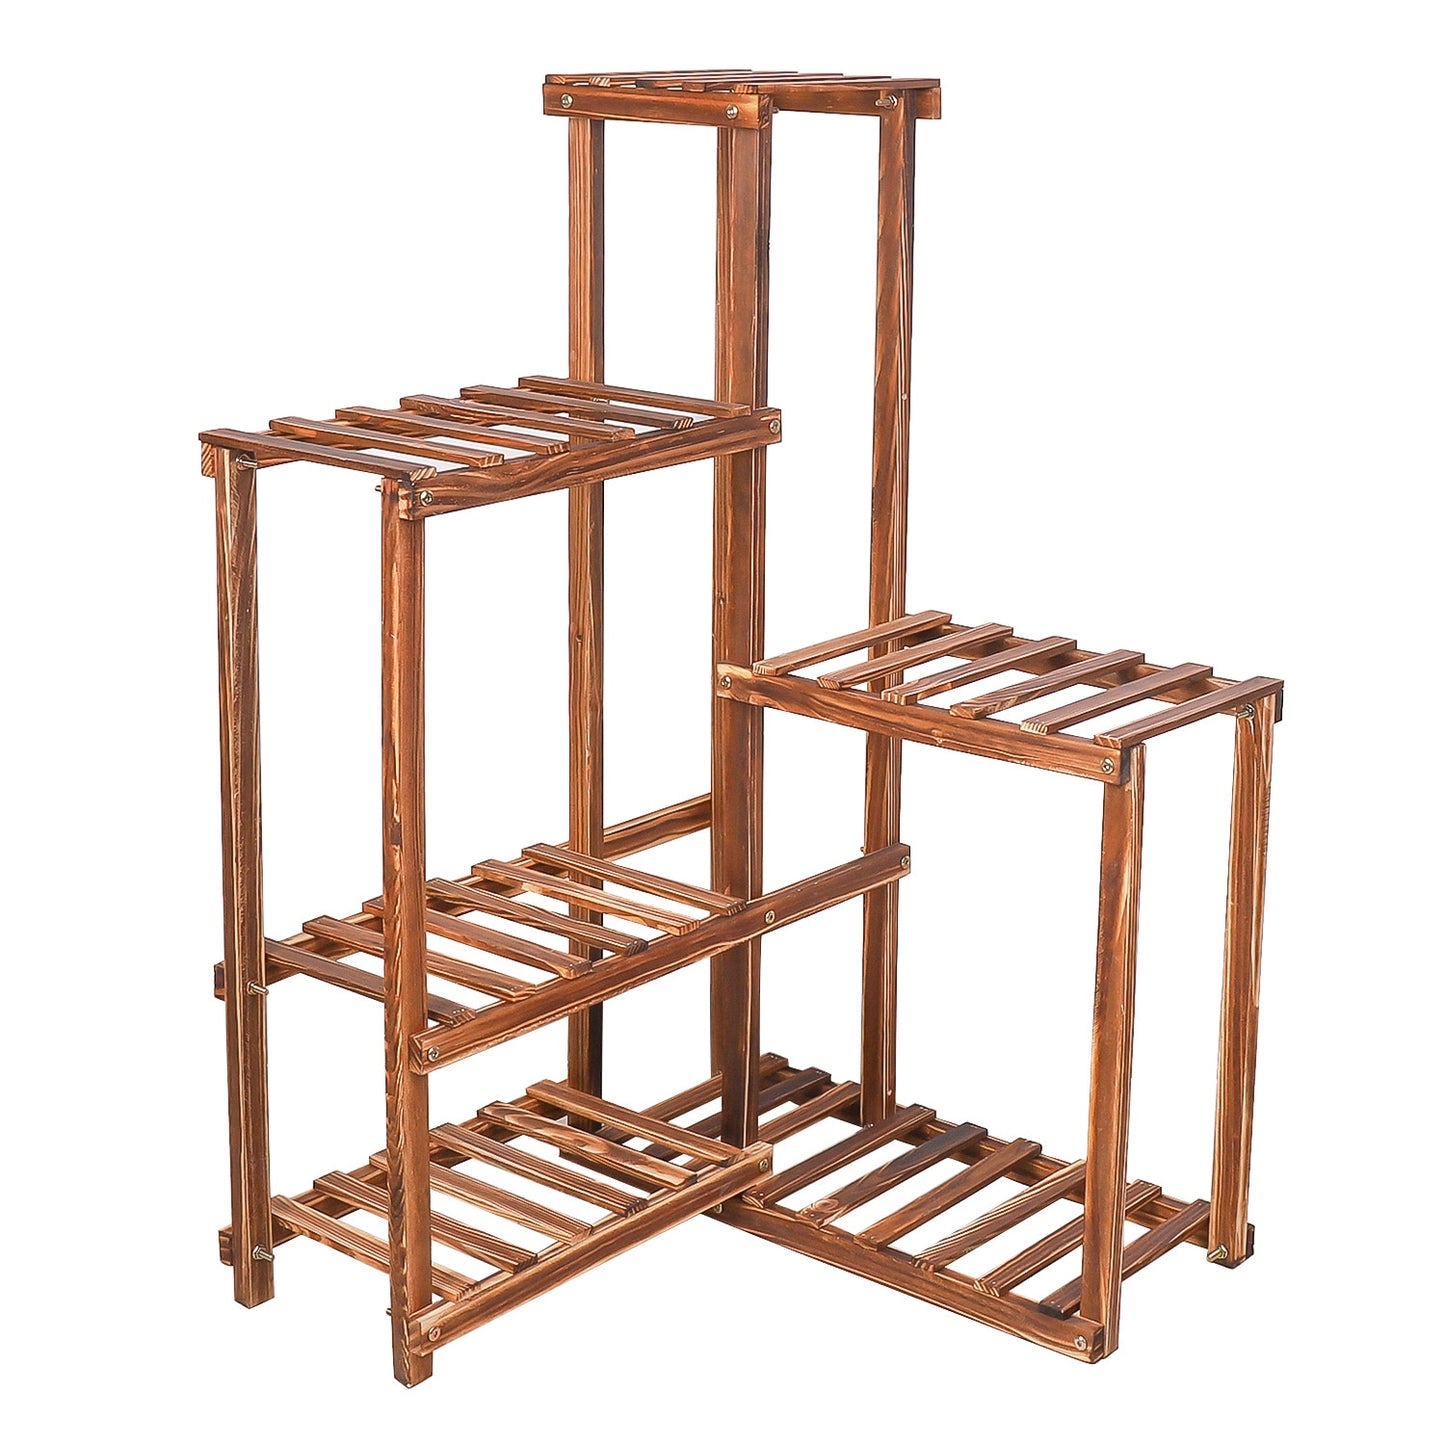 5 Tier Wooden Plant Stand